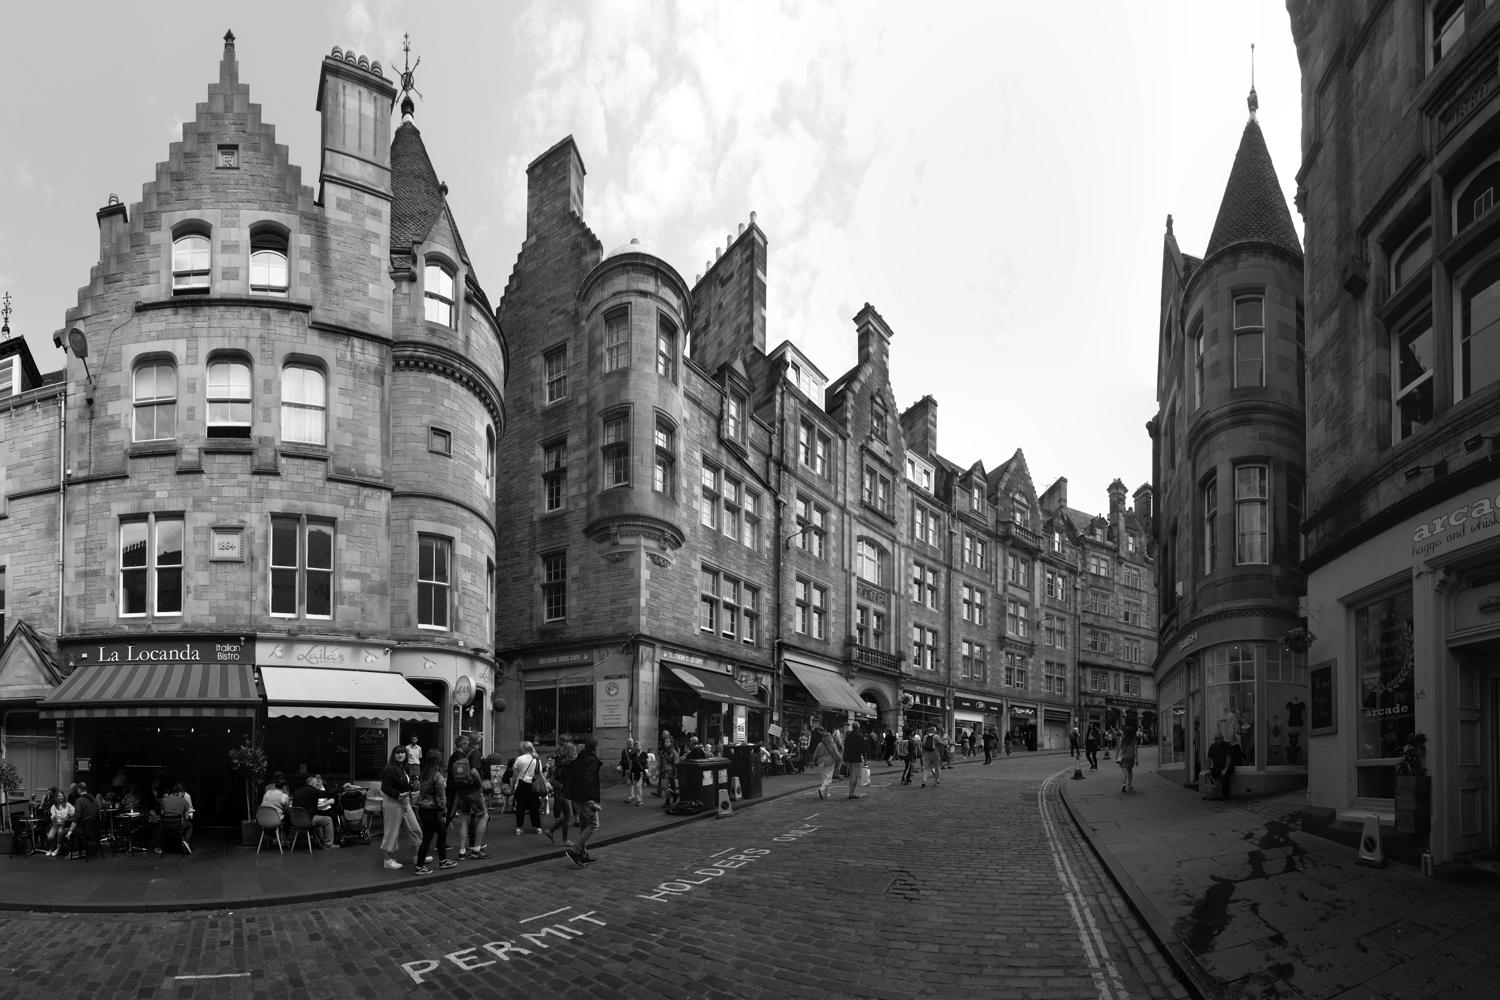 Cockburn Street is one of Edinburgh's nicest streets curving down from the Royal Mile to Waverley Bridge. Unfortunately, most of the time it is used as a car park.